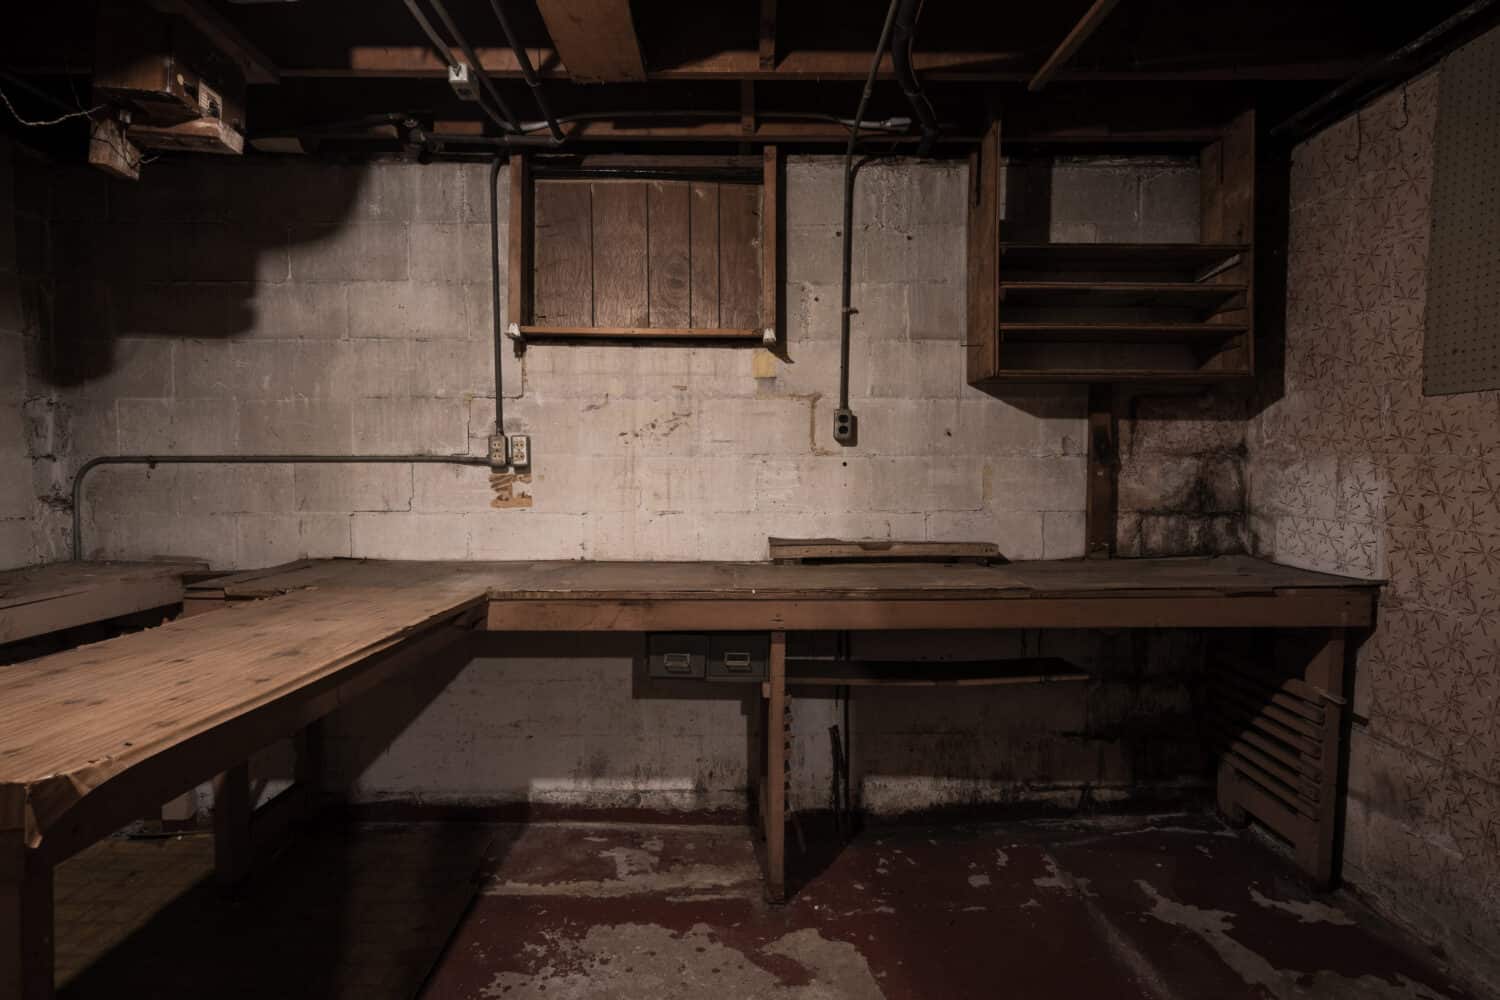 Inside the basement of an old creepy, empty house.  The door to this room had the words "Dark Room" painted on the door.  The room was dimly lit and there was a lot of mold.